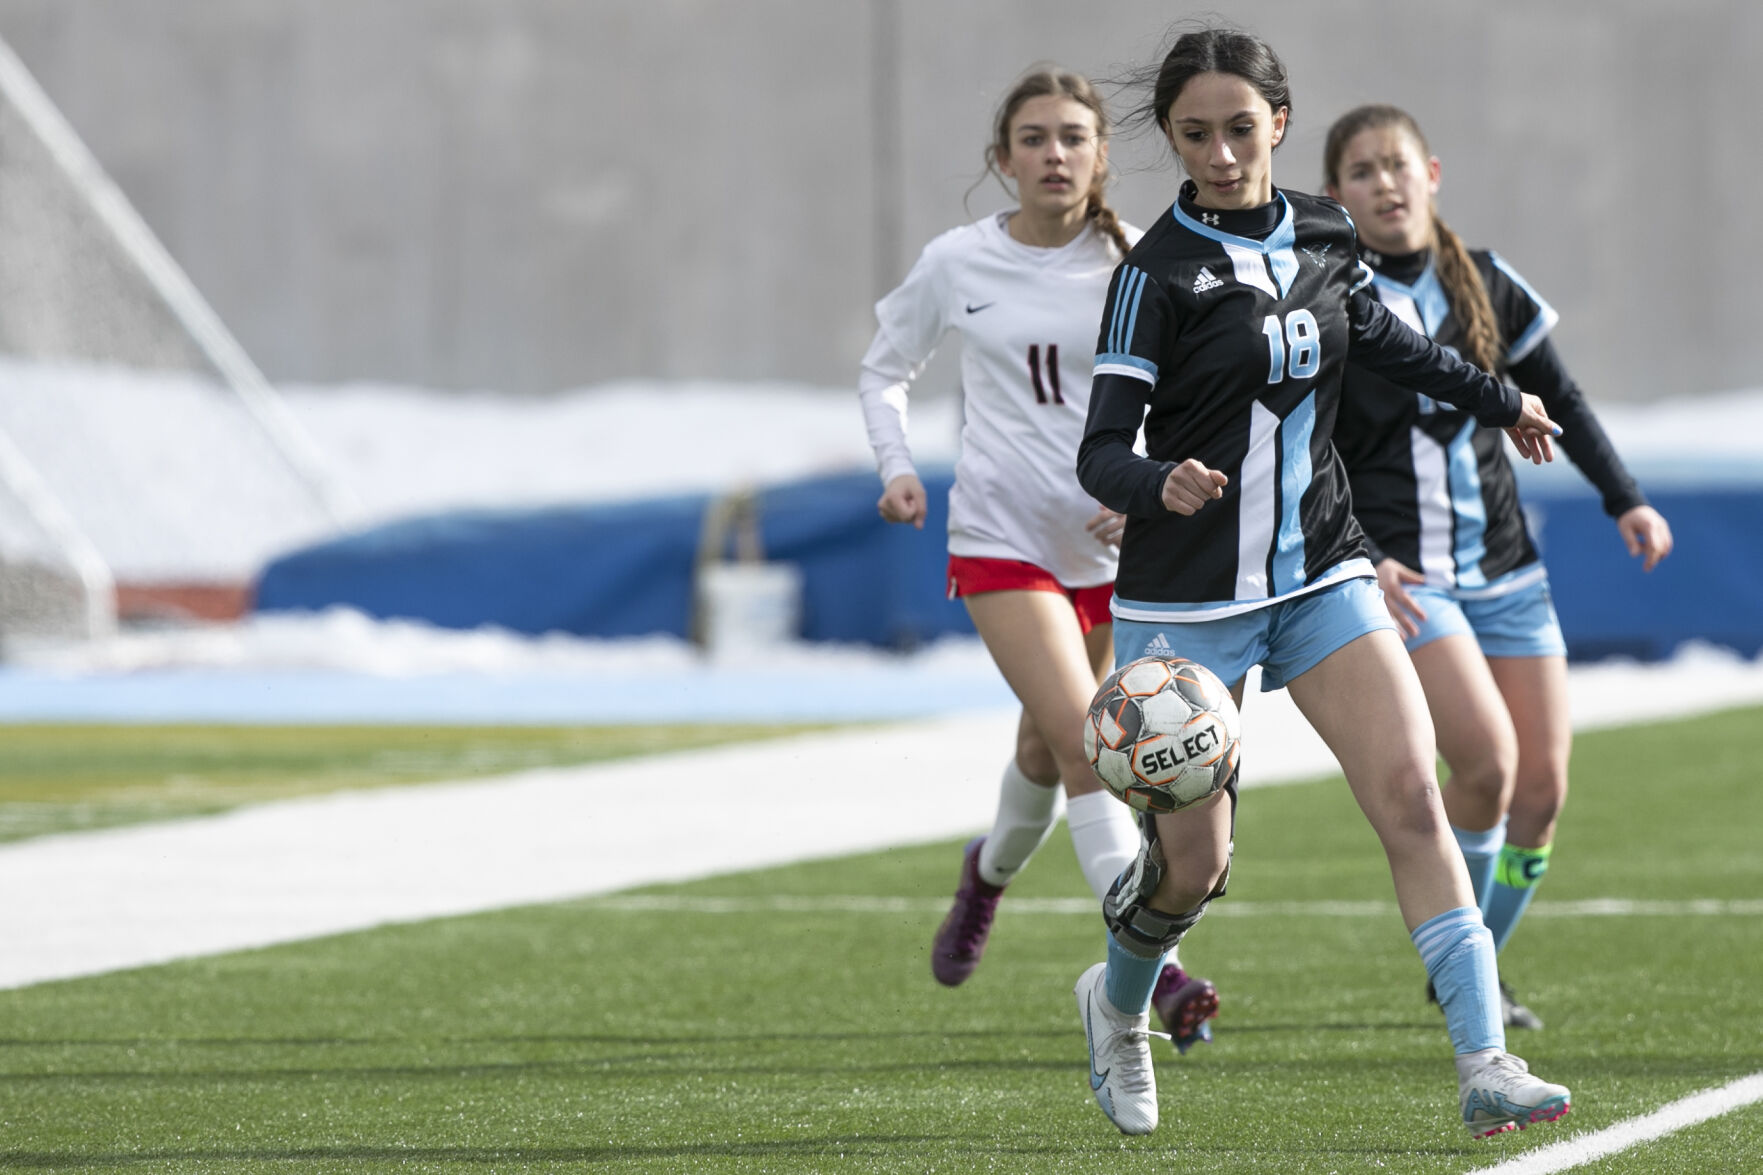 Cheyenne East Soccer Stars Head to College Soccer Programs Together